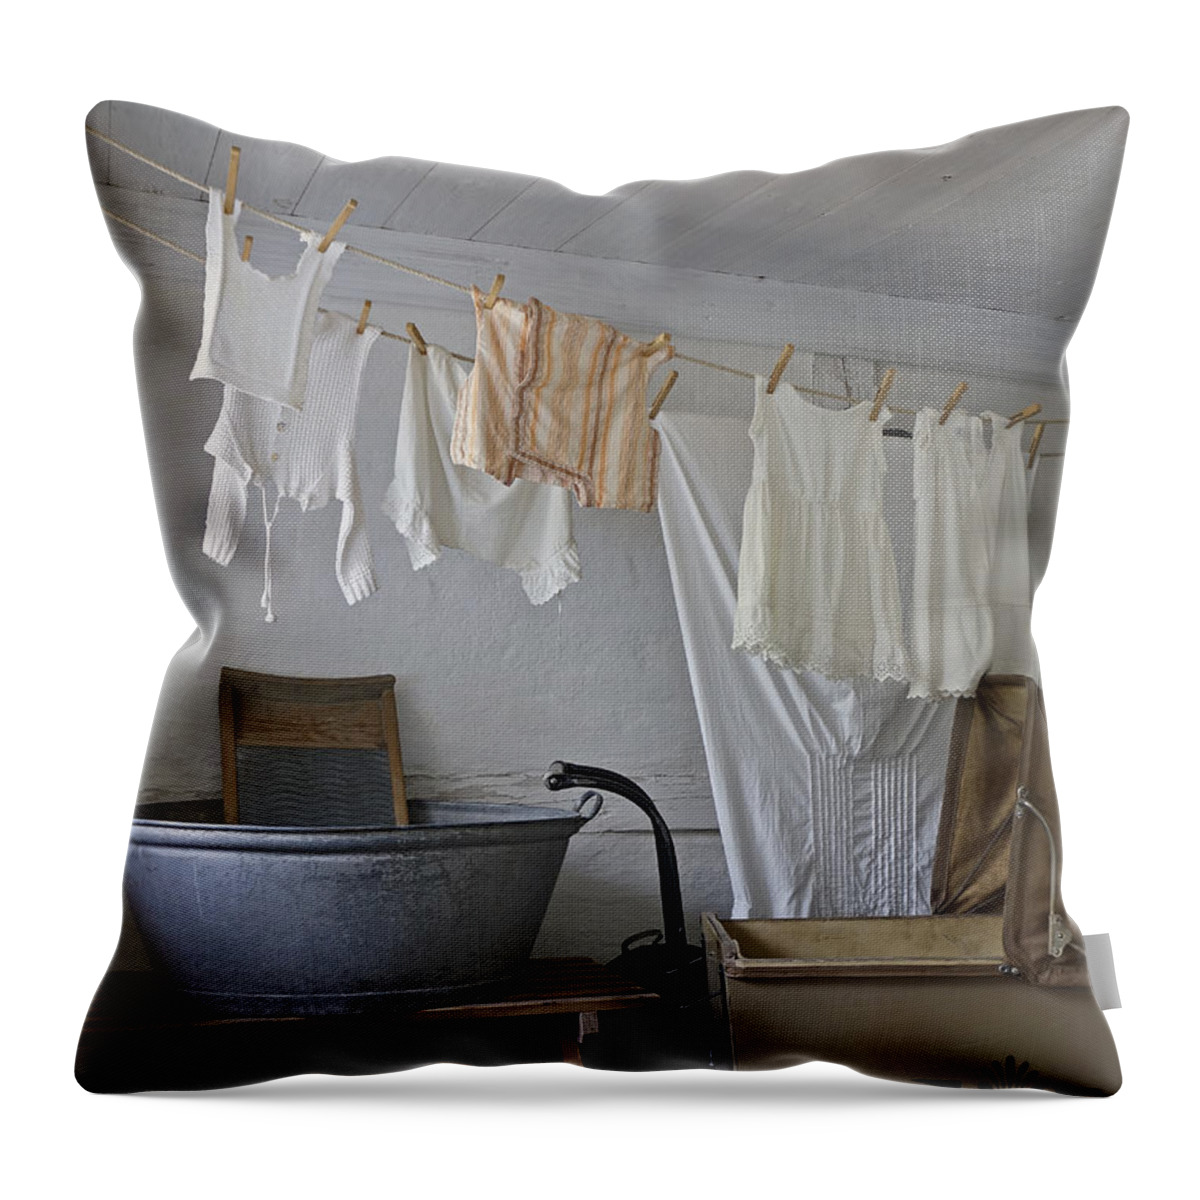 Laundry Throw Pillow featuring the photograph Laundry Day #2 by Inge Riis McDonald